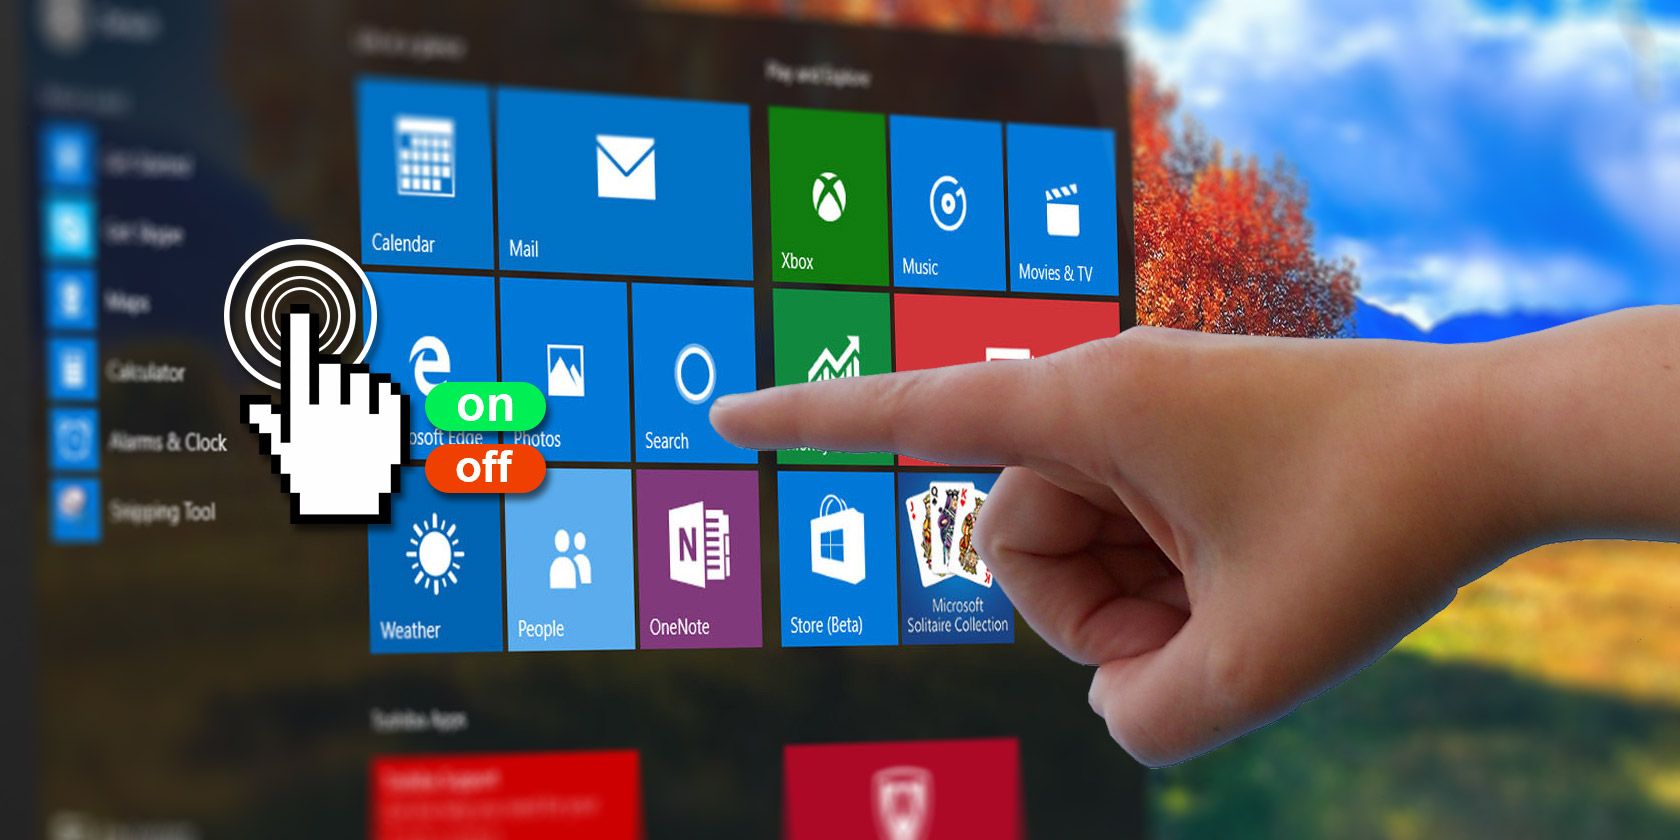 How to Toggle the Touchscreen in Windows 10